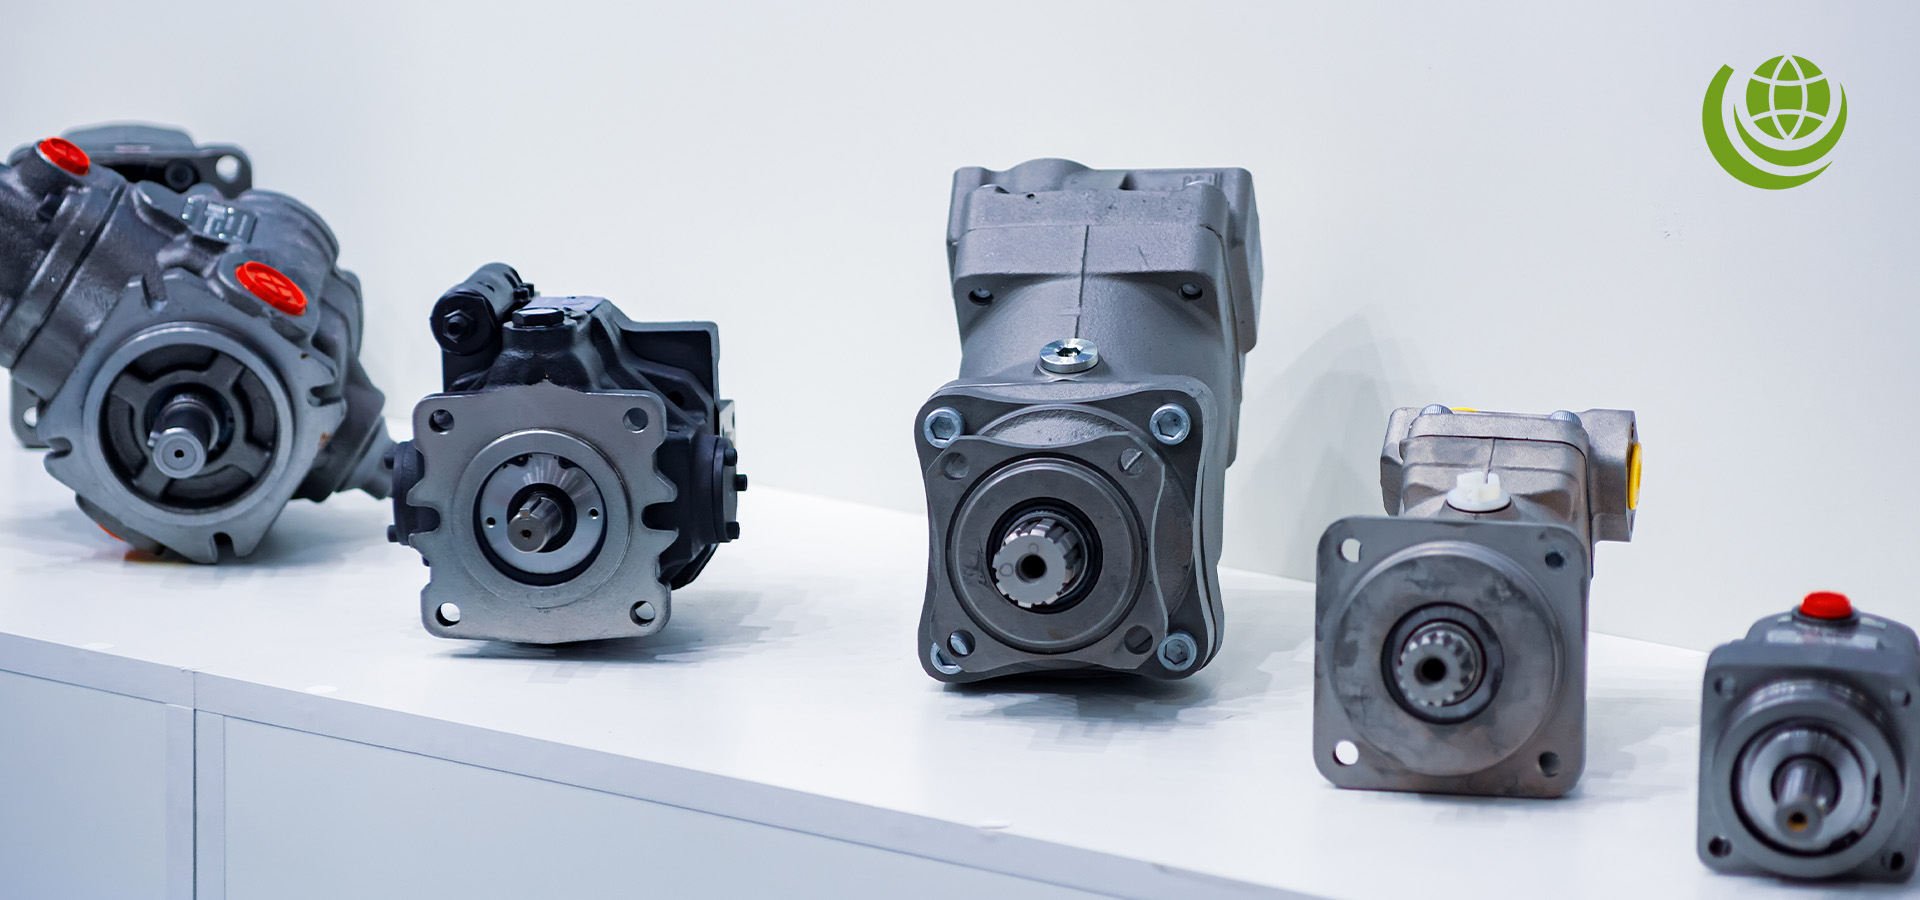 An Introduction to the Different Types of Hydraulic Motors